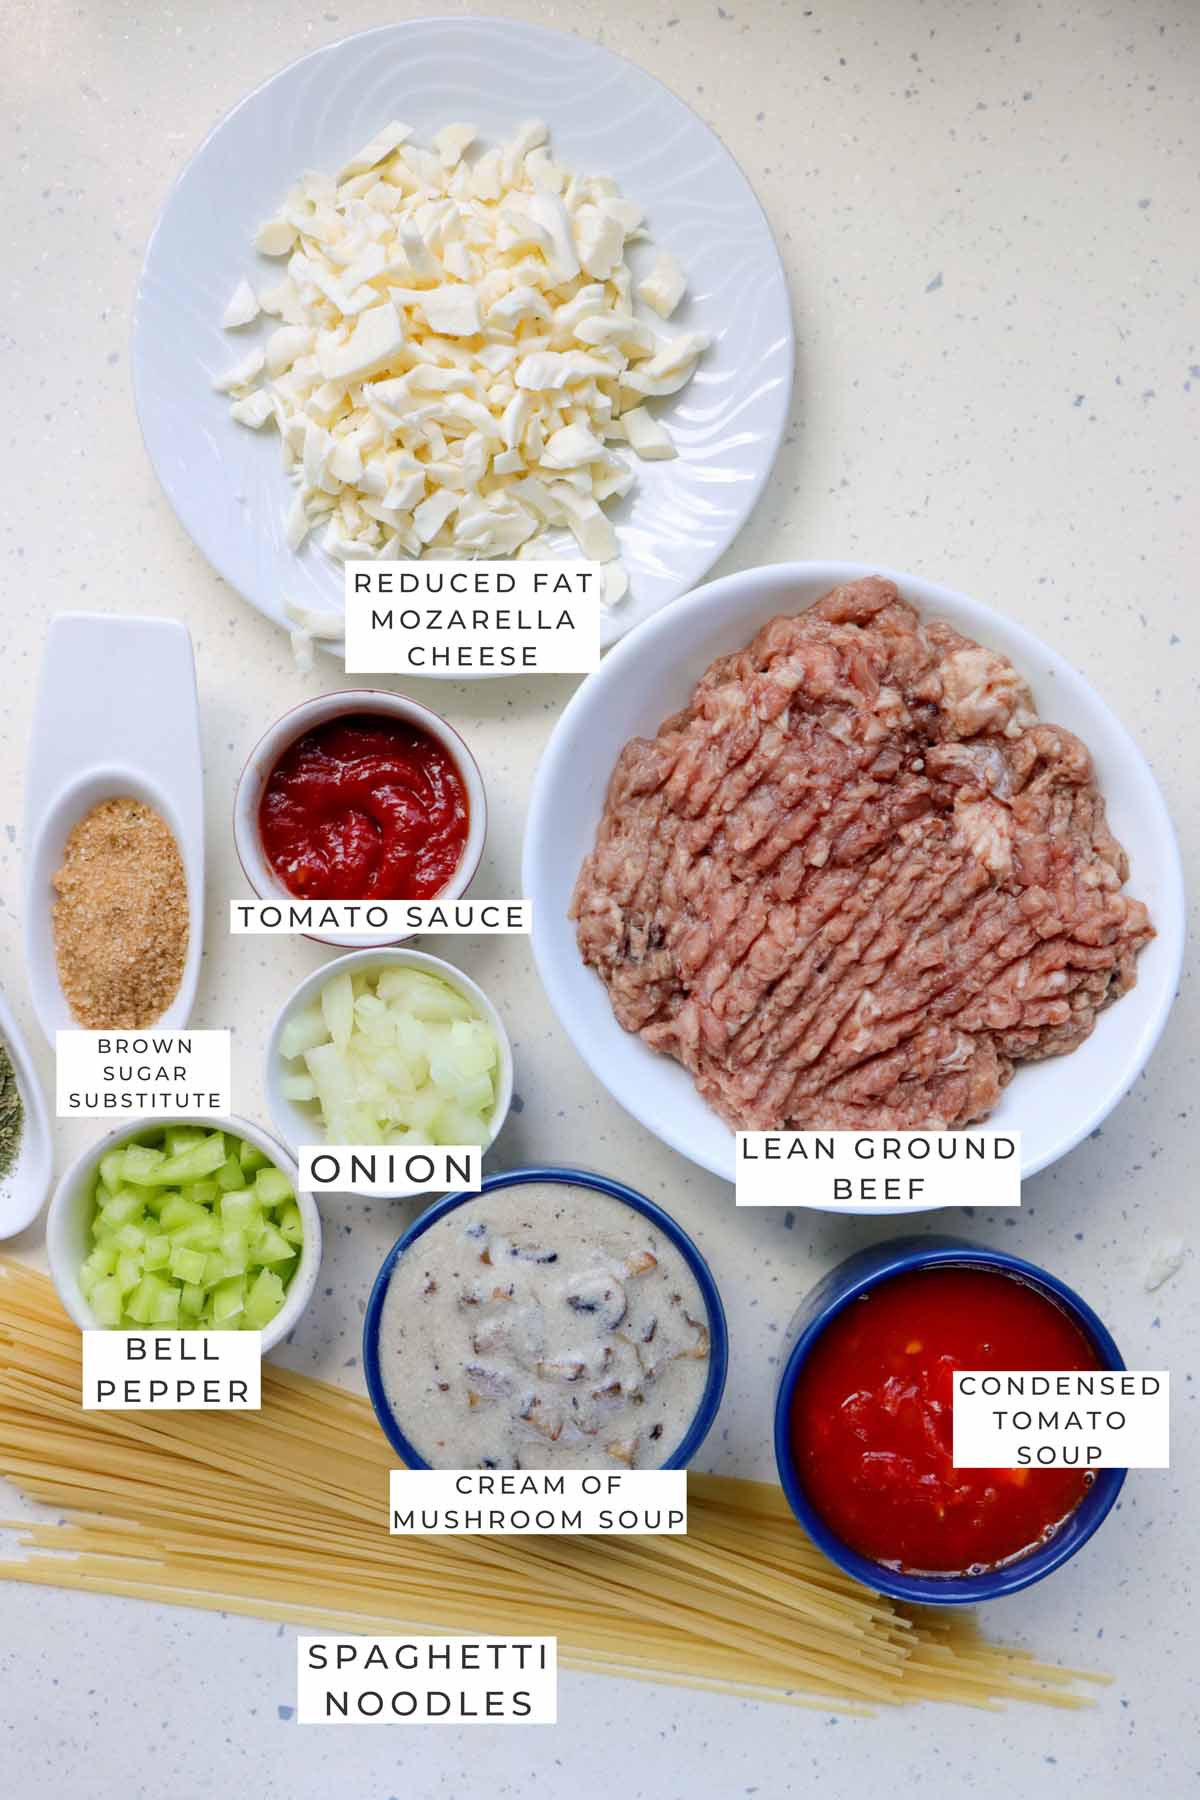 Labeled ingredients to make the baked spaghetti.